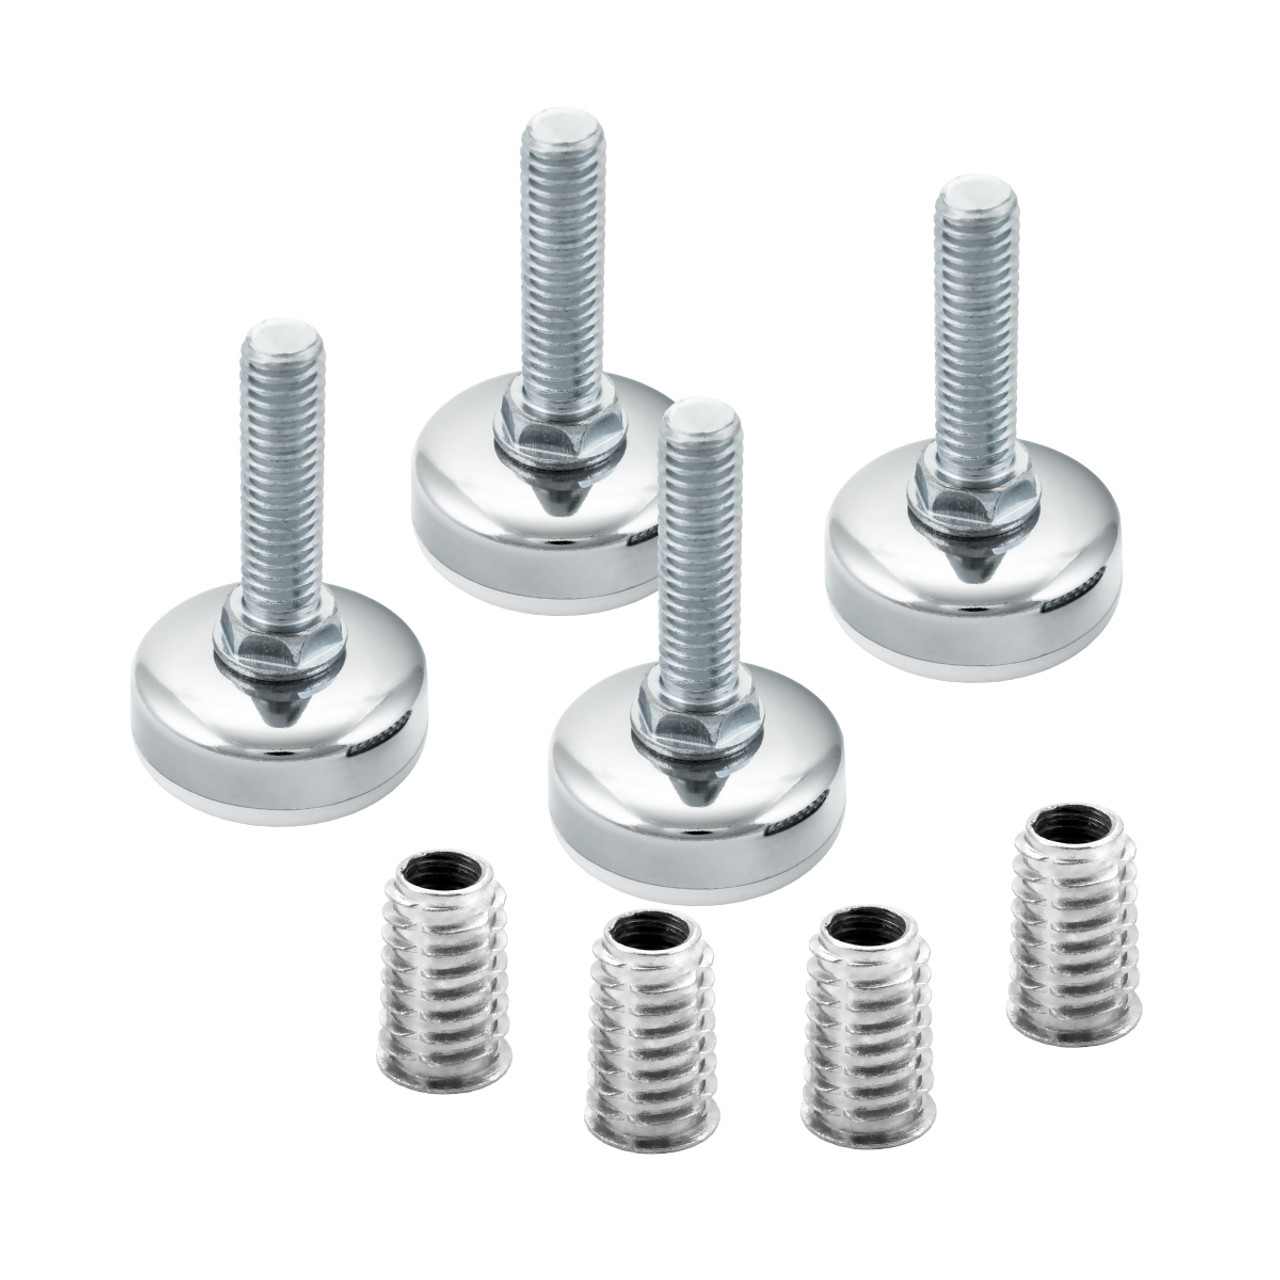 10mm Round Screw On Purse Feet - Set of 4 - So You Need Hardware